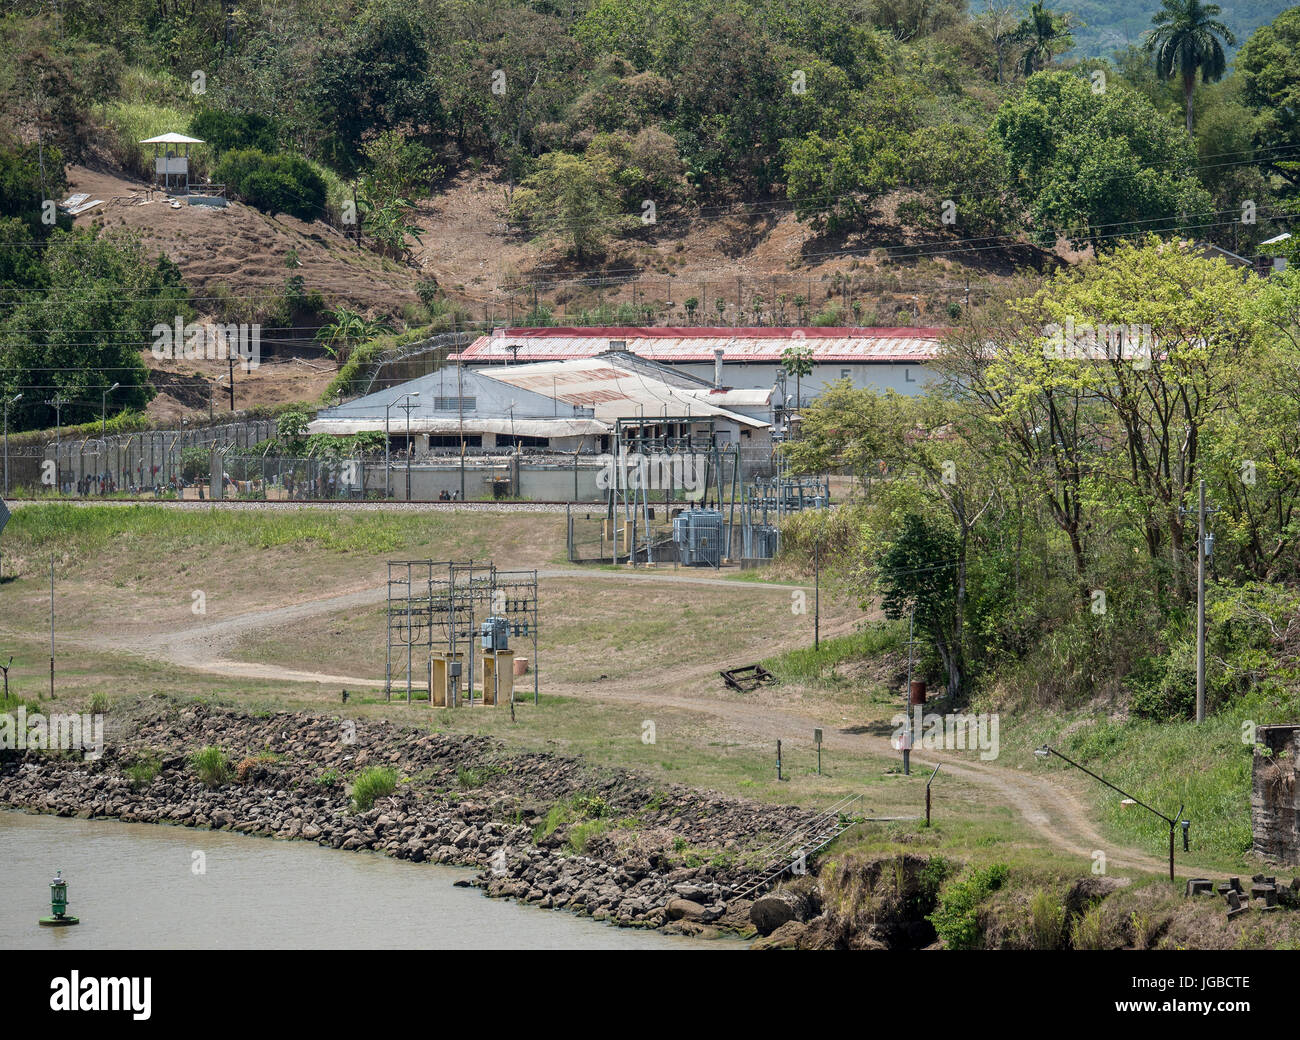 El Renacer Prison in Gamboa On The Banks Of The Panama Canal, The Prison Manuel Noriega Was In When Returned From The United States Stock Photo